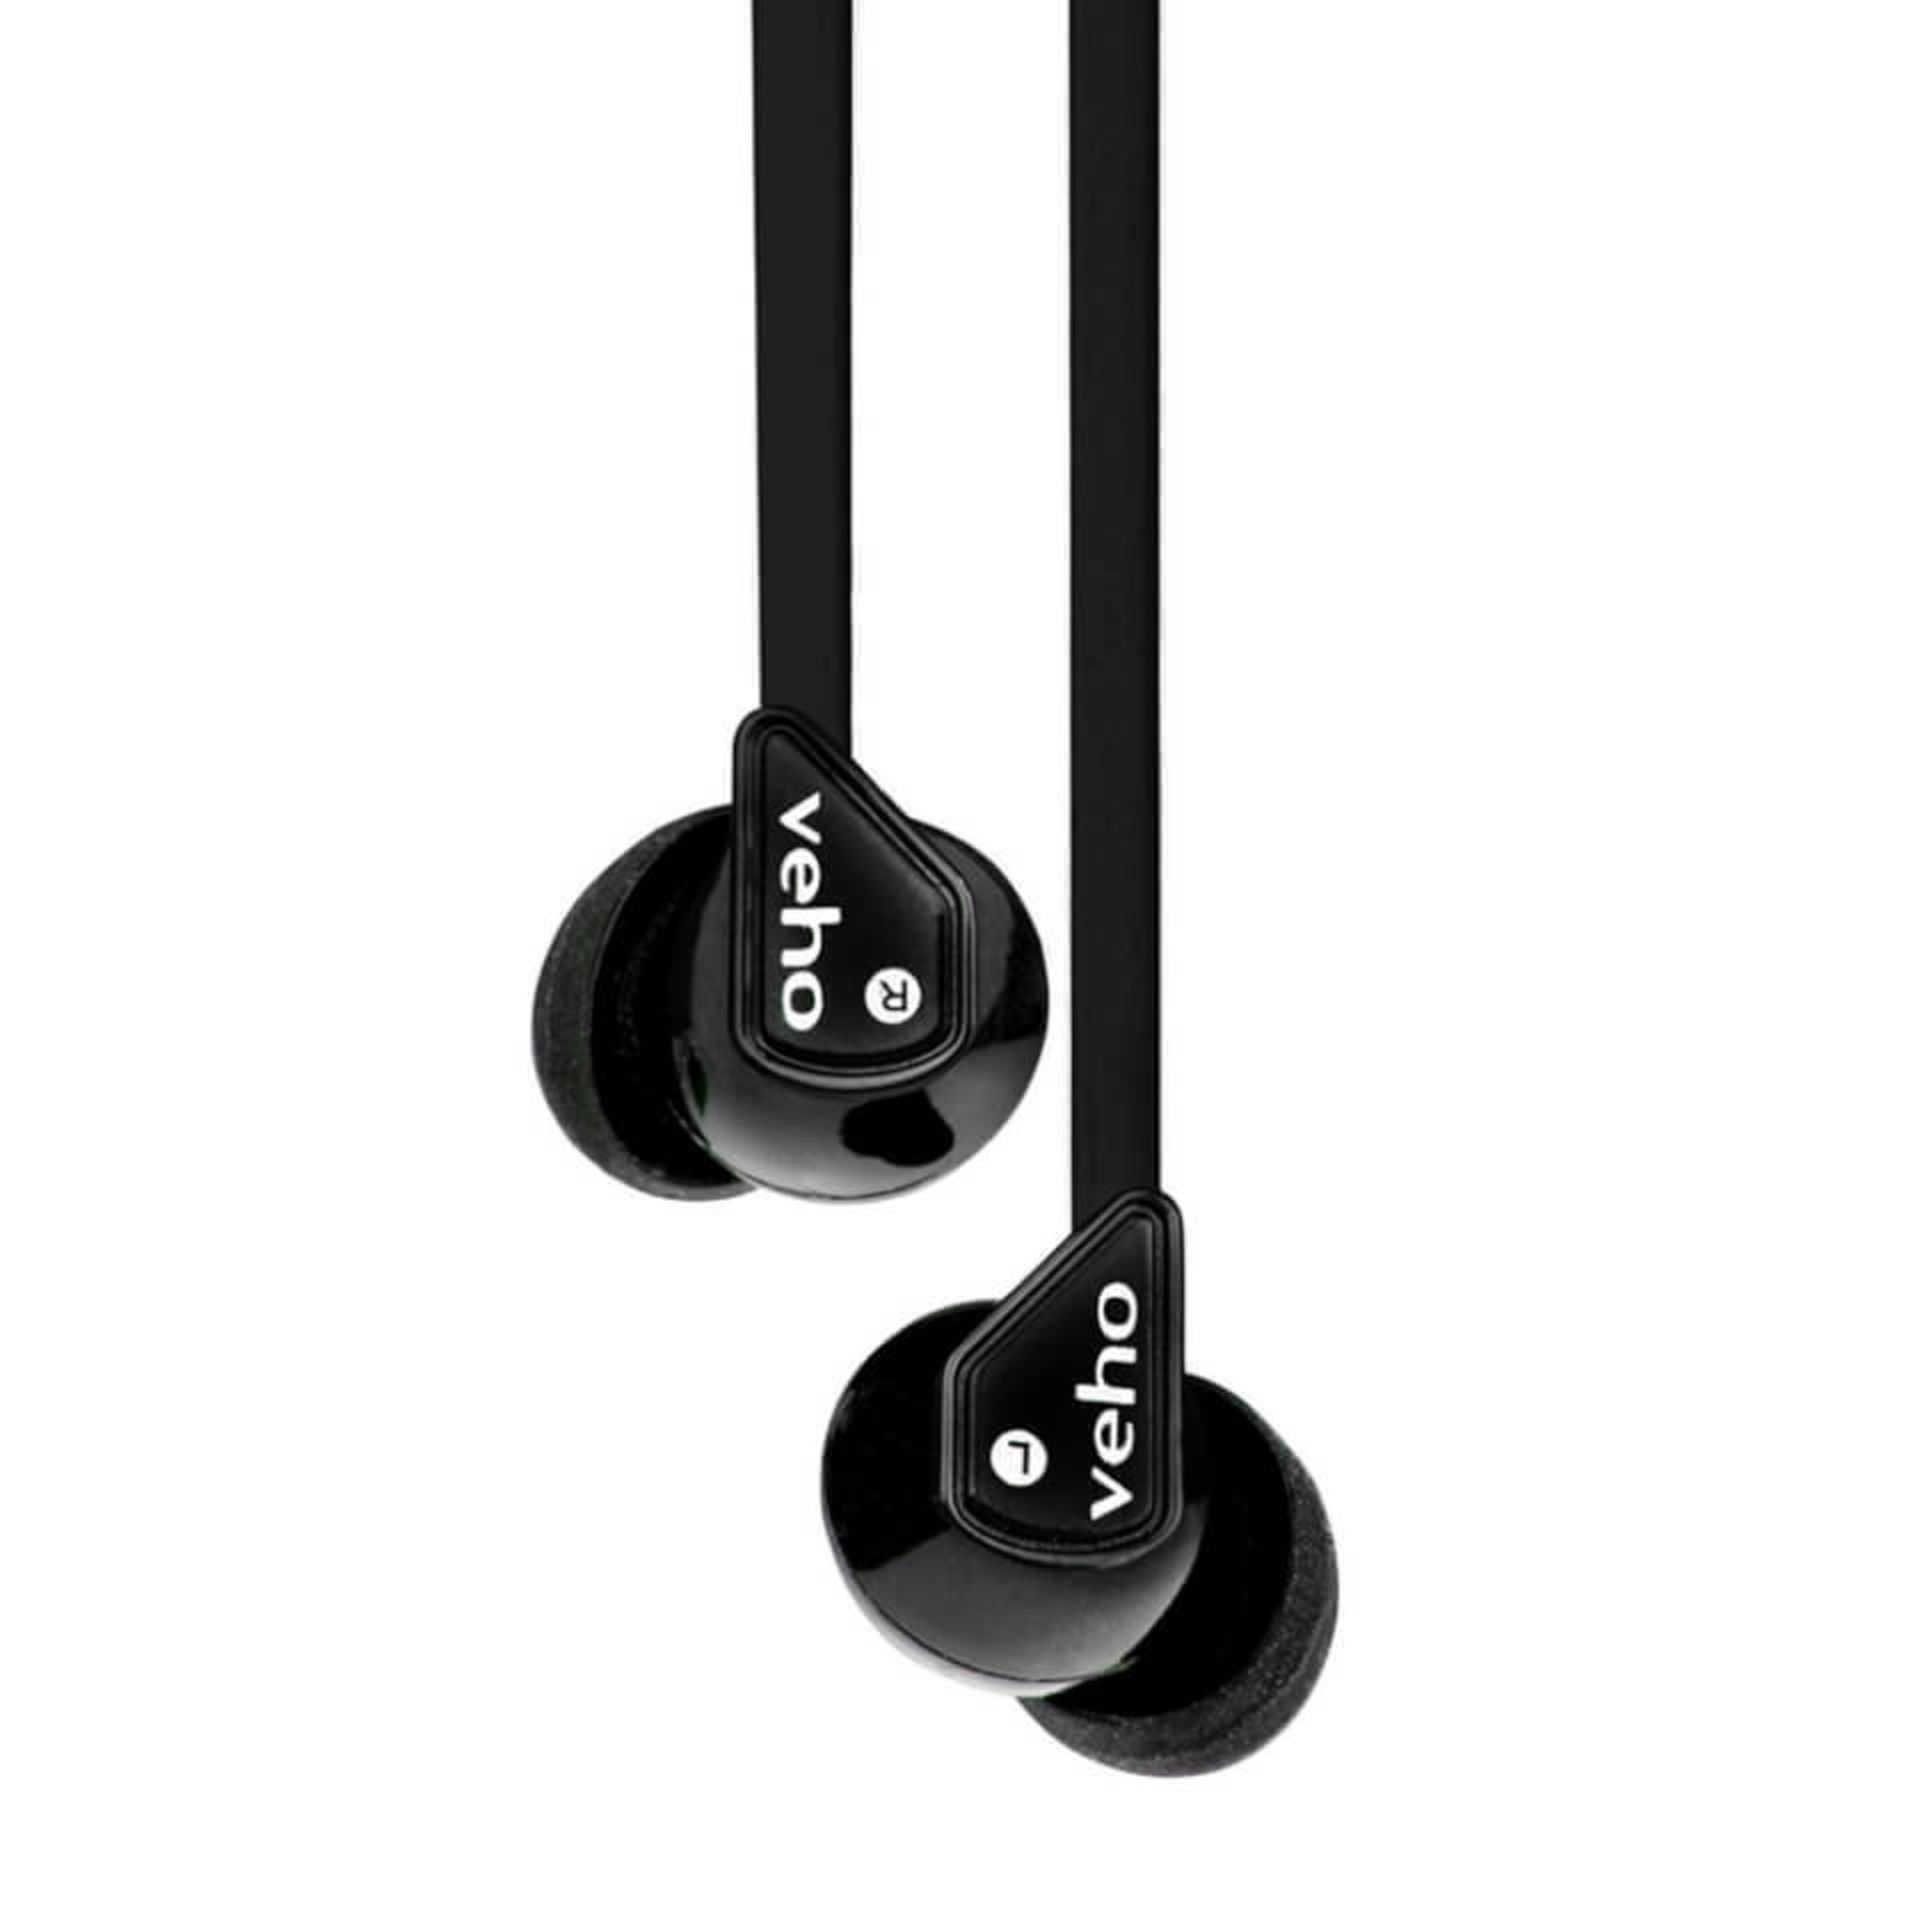 V *TRADE QTY* Brand New Veho Z-1 Noise Isolating Stereo Earbuds - Black - Online Price £19.95 X 4